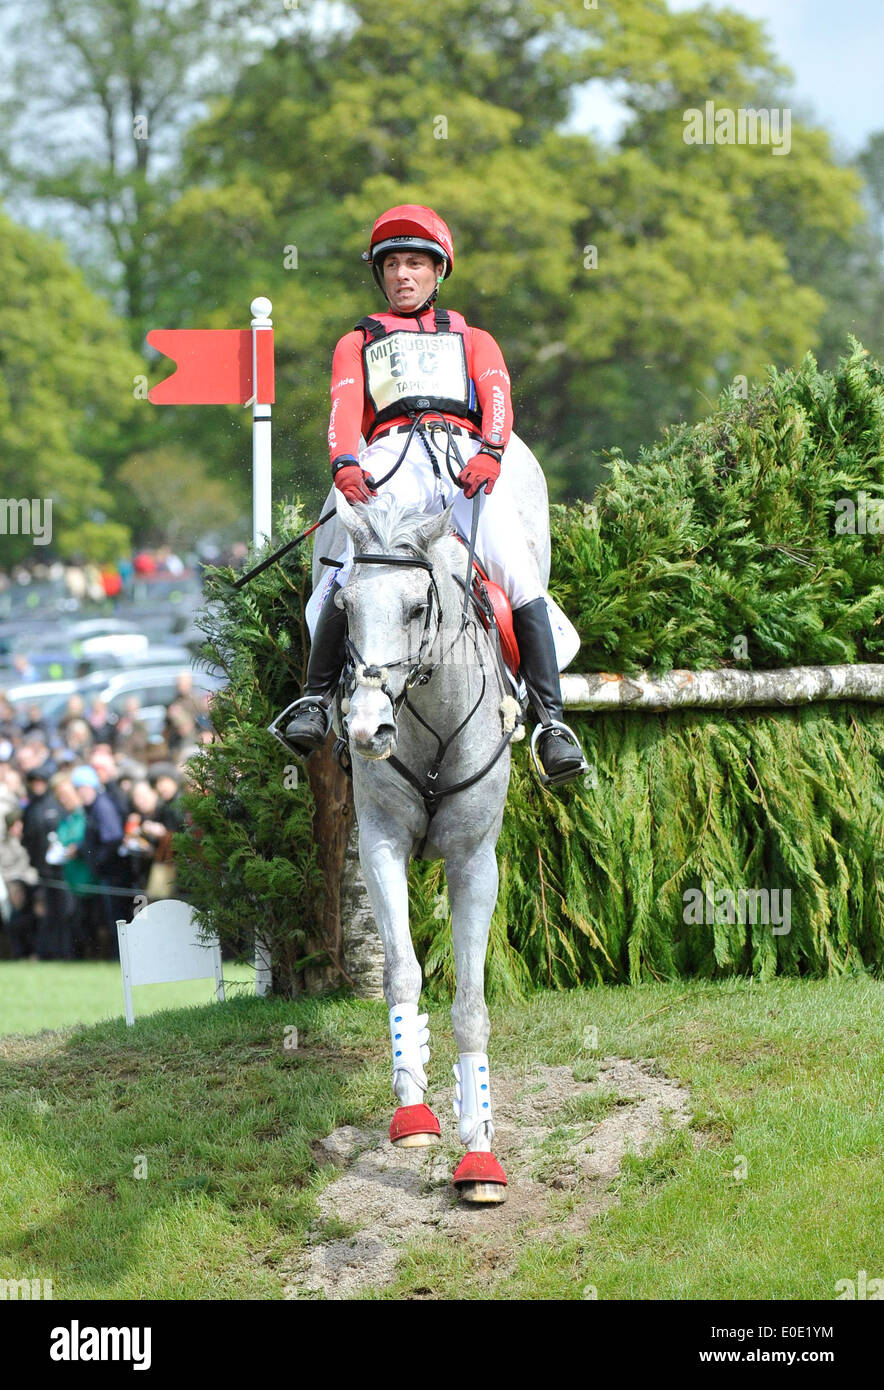 10.05.2014. Badminton, Paul Tapner (AUS) during the Cross Country phase of the Badminton Horse Trials from Badminton Park.Paul Tapner (AUS) riding Kilronan Stock Photo